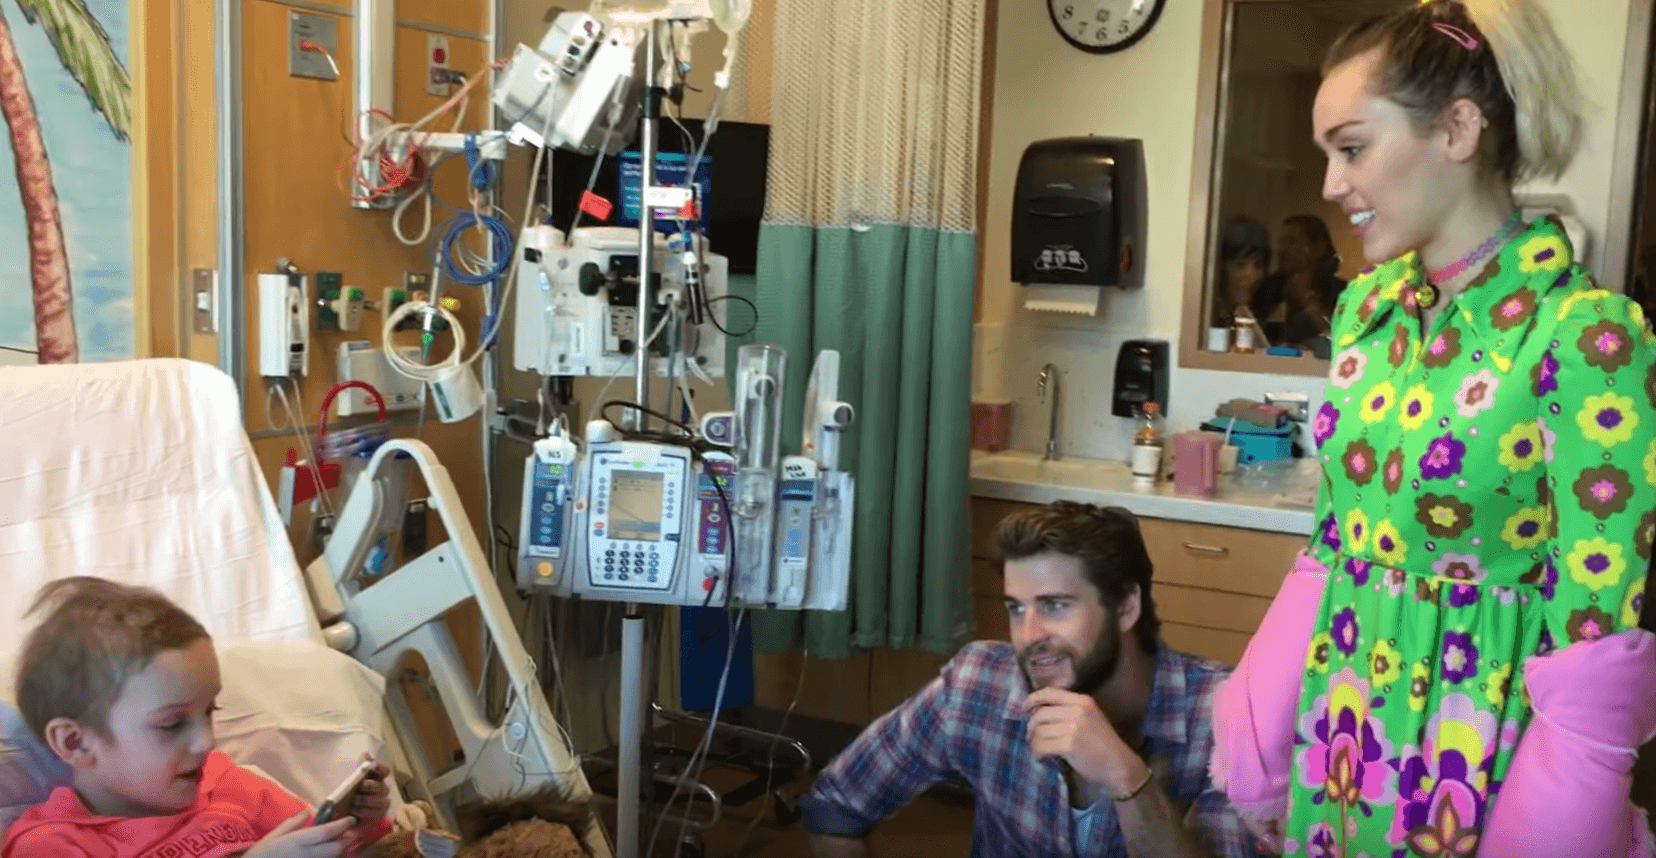 WATCH: Miley Cyrus, Liam Hemsworth hear young cancer patient sing